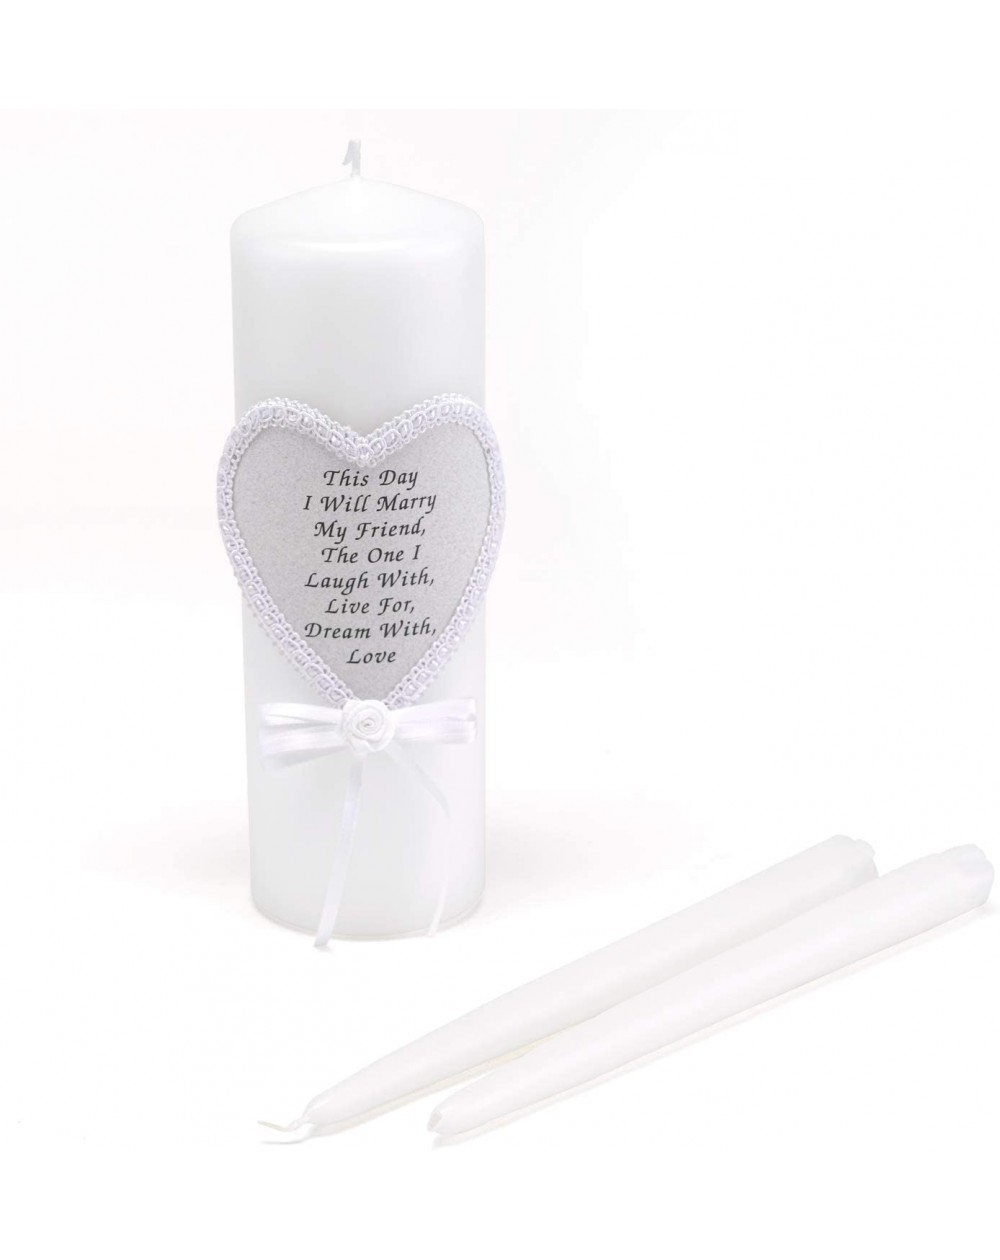 Ceremony Supplies Wedding Accessories- Unity Candle Set- This Day I Will Marry My Friend- 9-Inch Pillar and 2 10-Inch Tapers ...